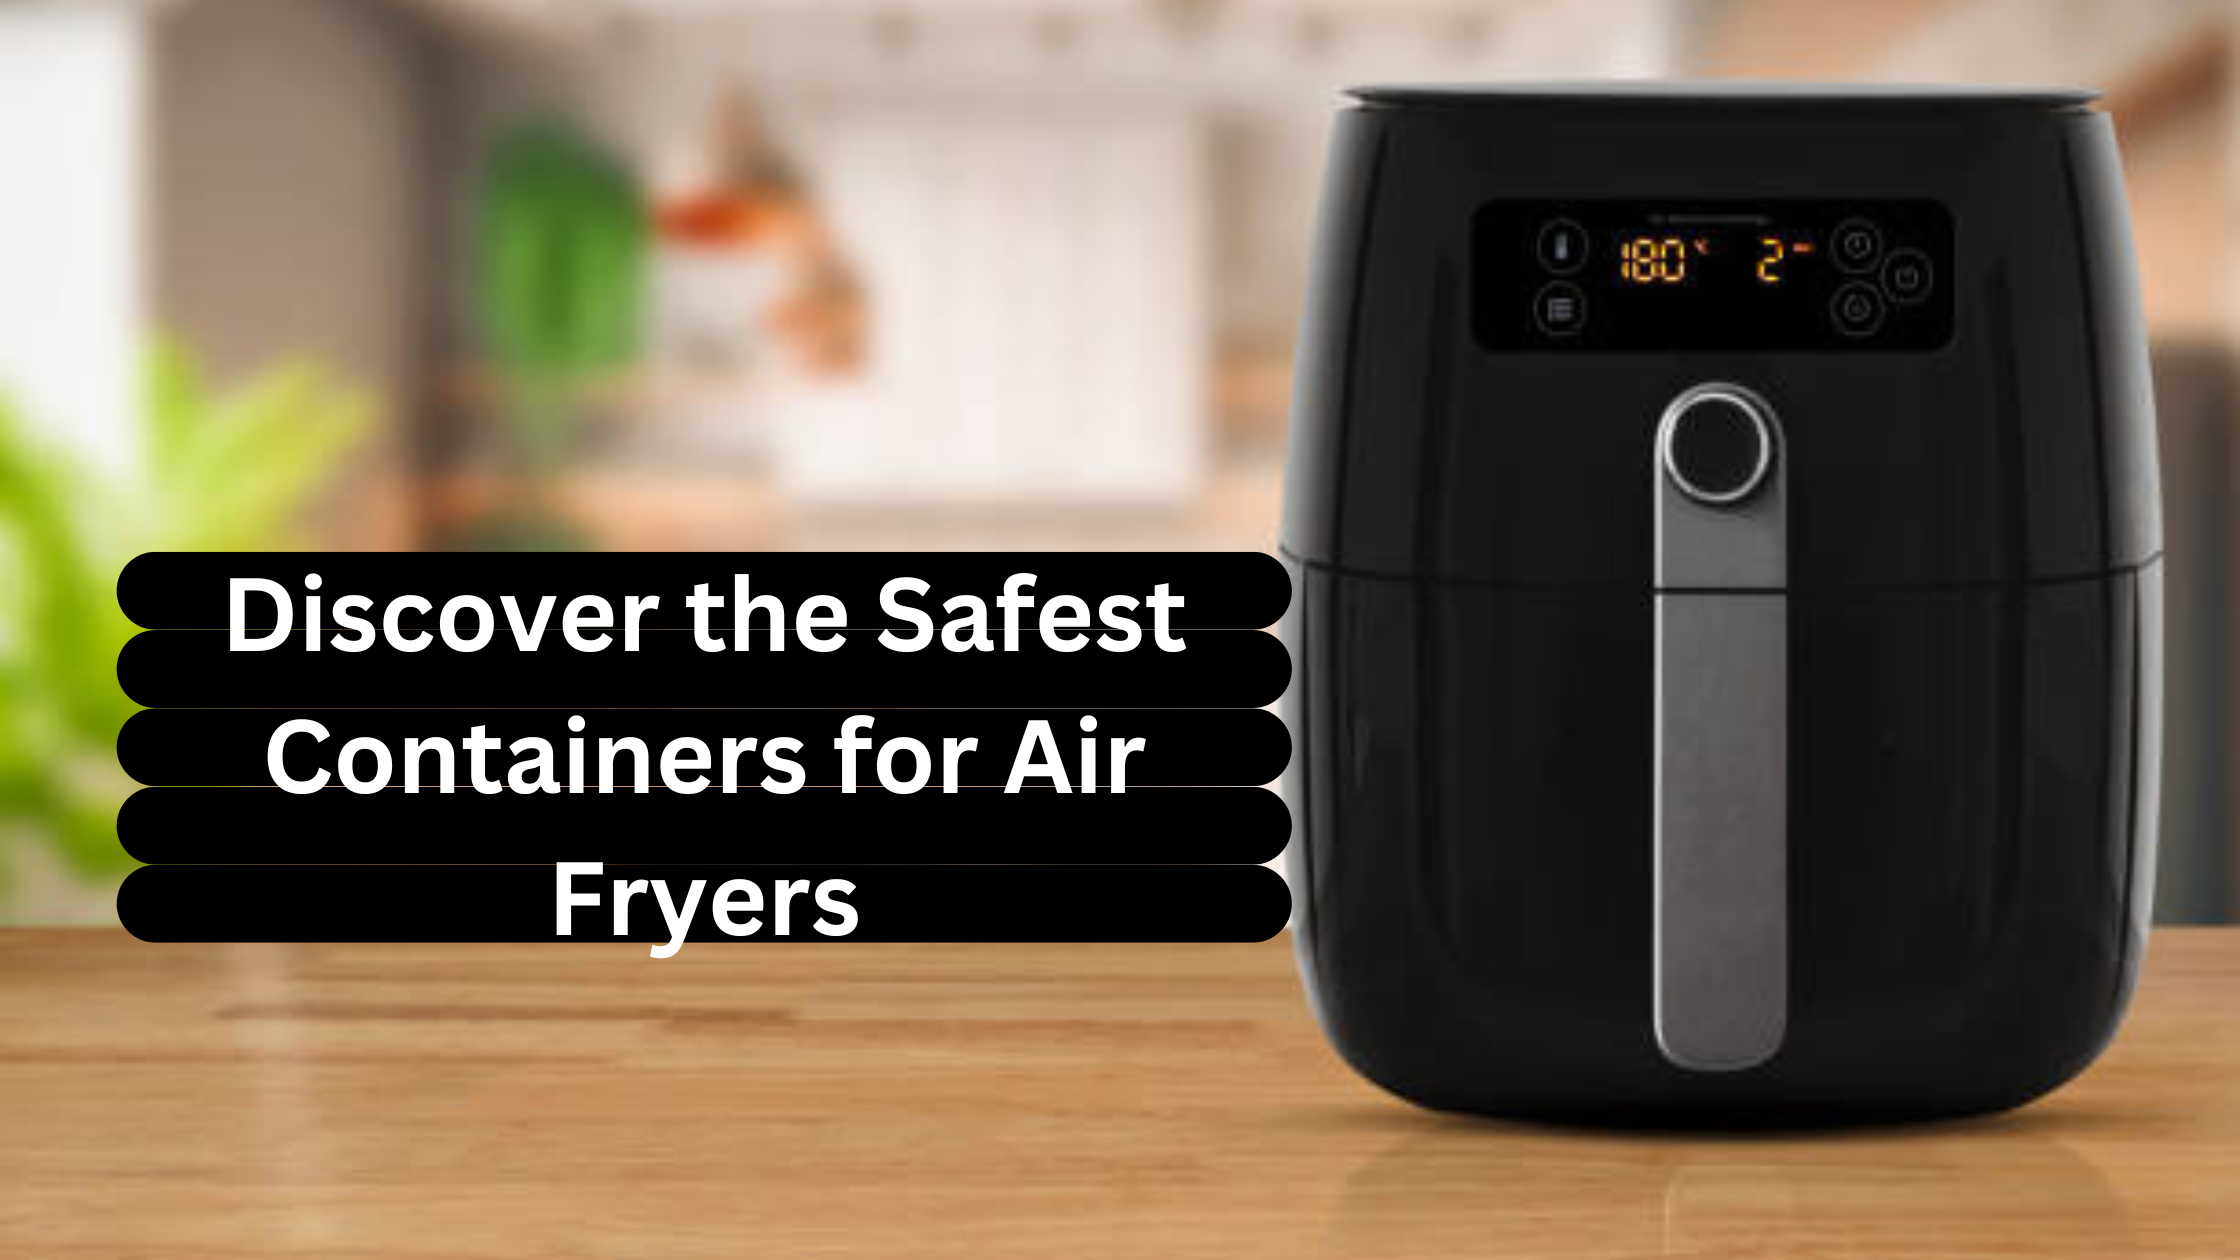 Discover the Safest Containers for Air Fryers